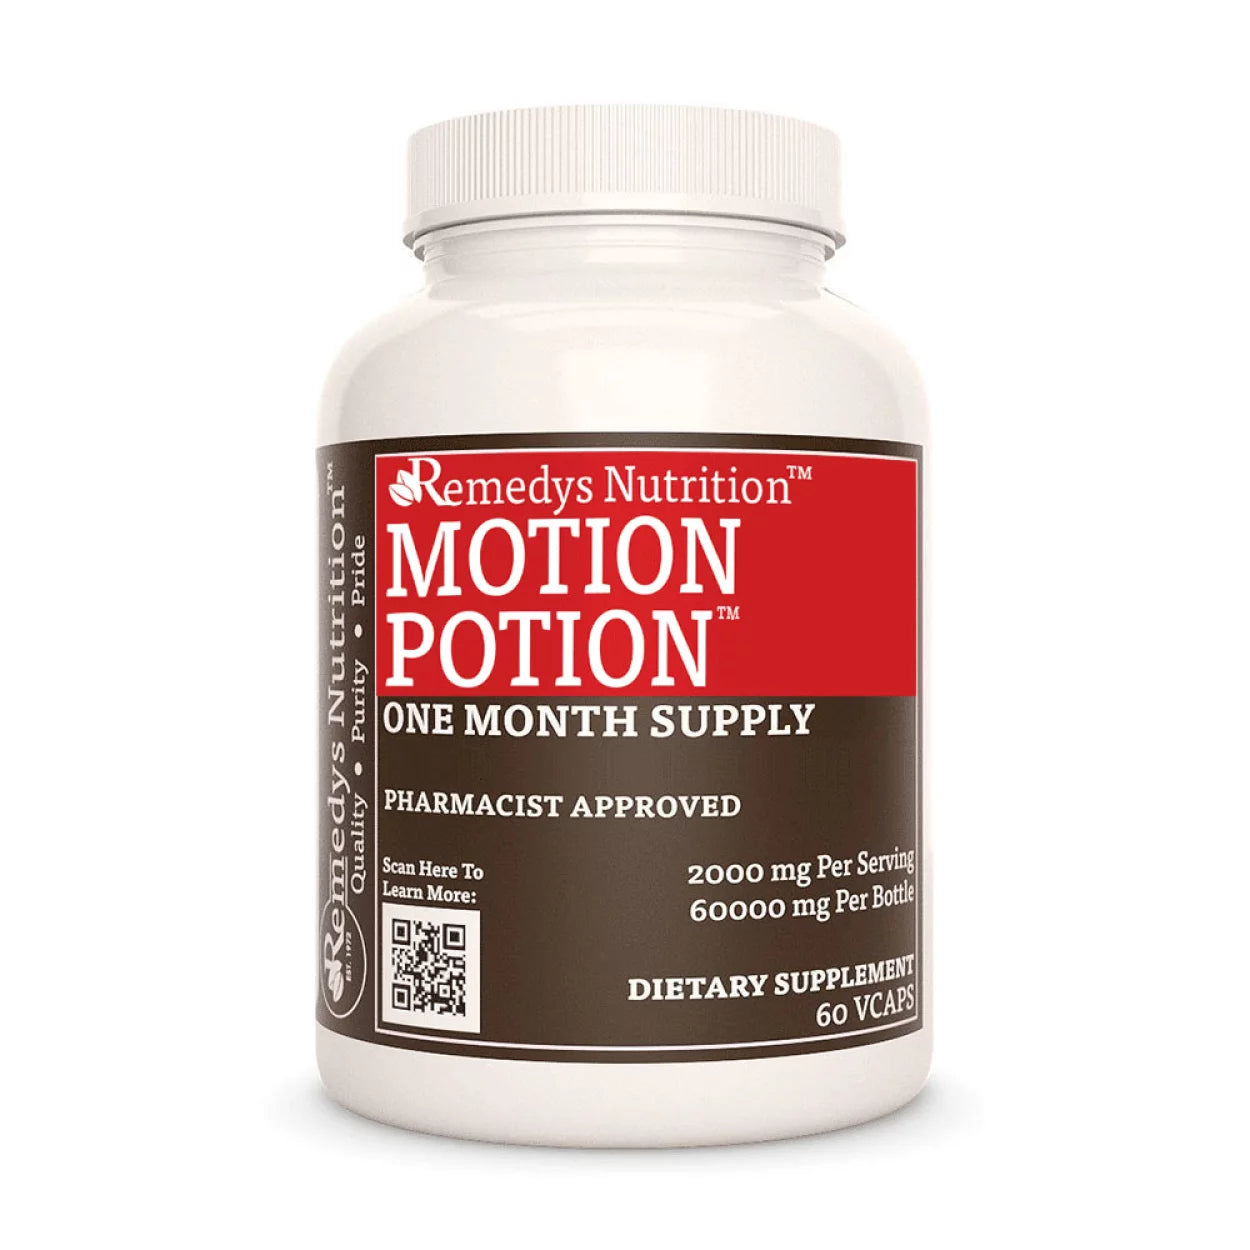 Image of Remedy's Nutrition® Motion Potion™ Capsules Dietary Herbal Supplement front bottle. Made in USA. Neem Burdock Cherry